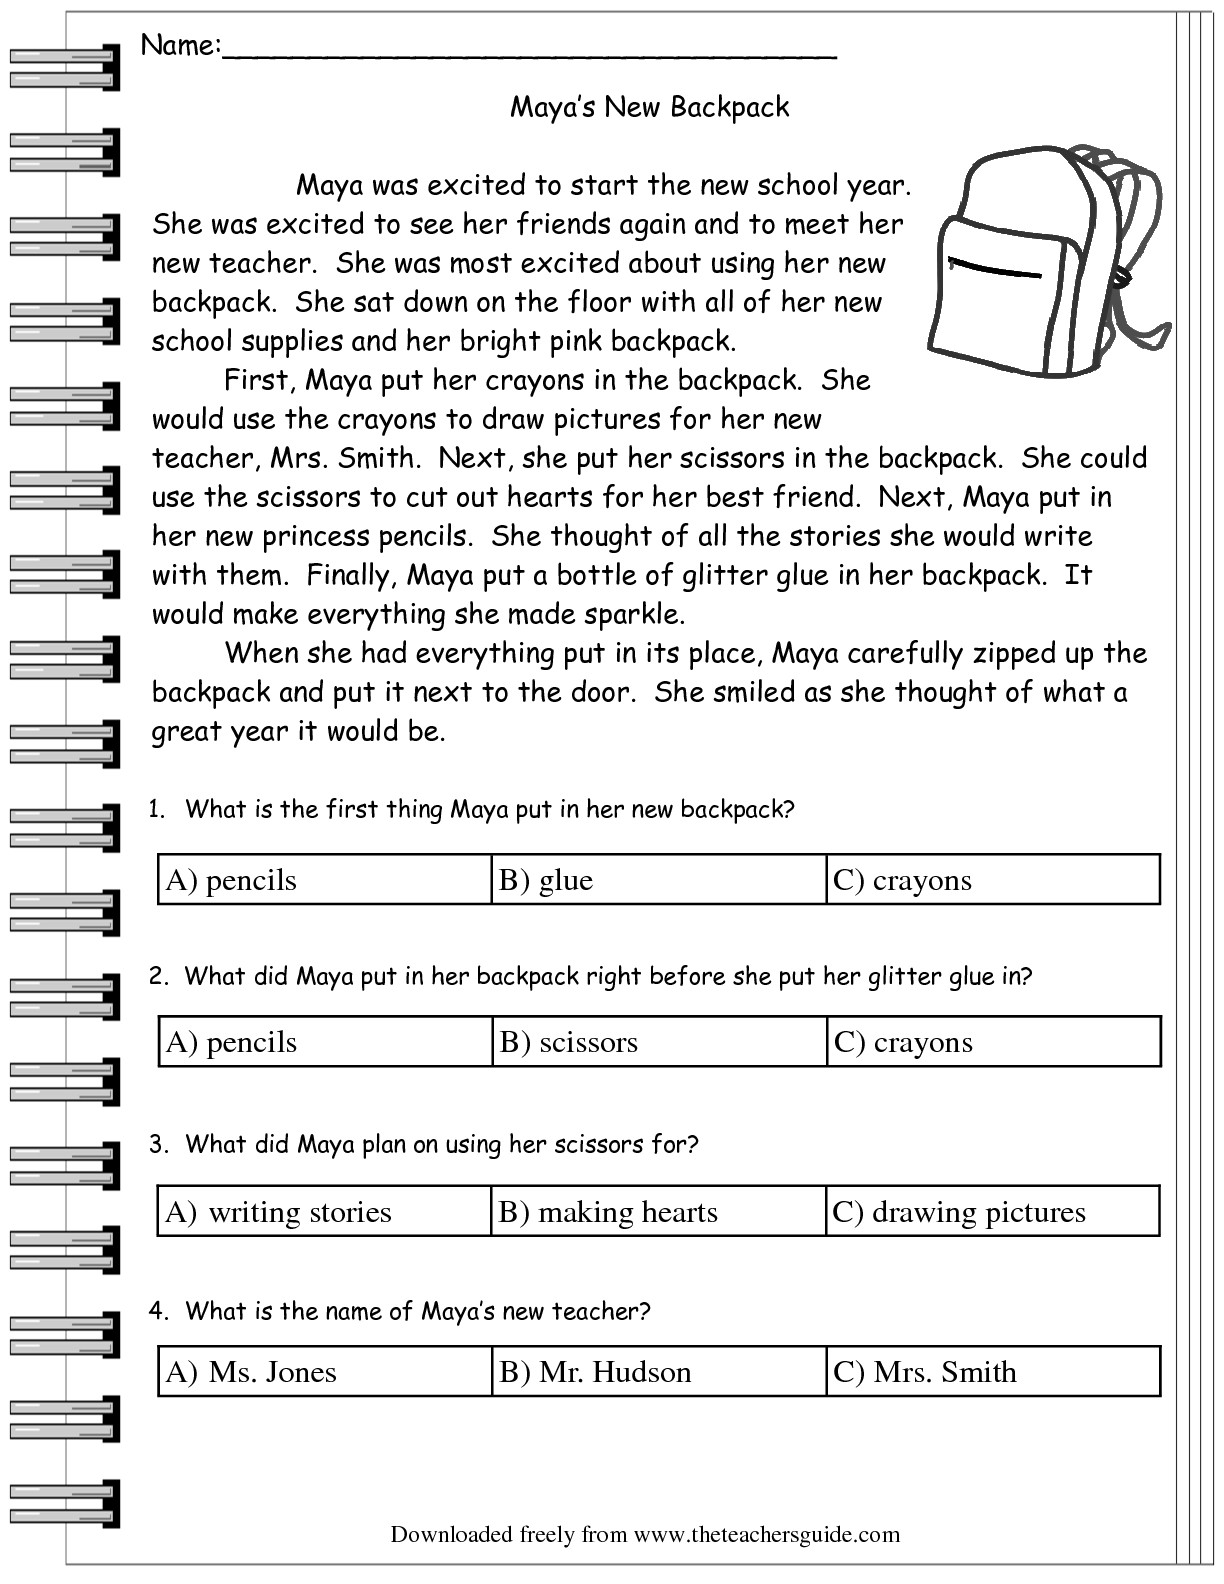 5th-grade-multiple-choice-reading-comprehension-worksheets-times-tables-worksheets